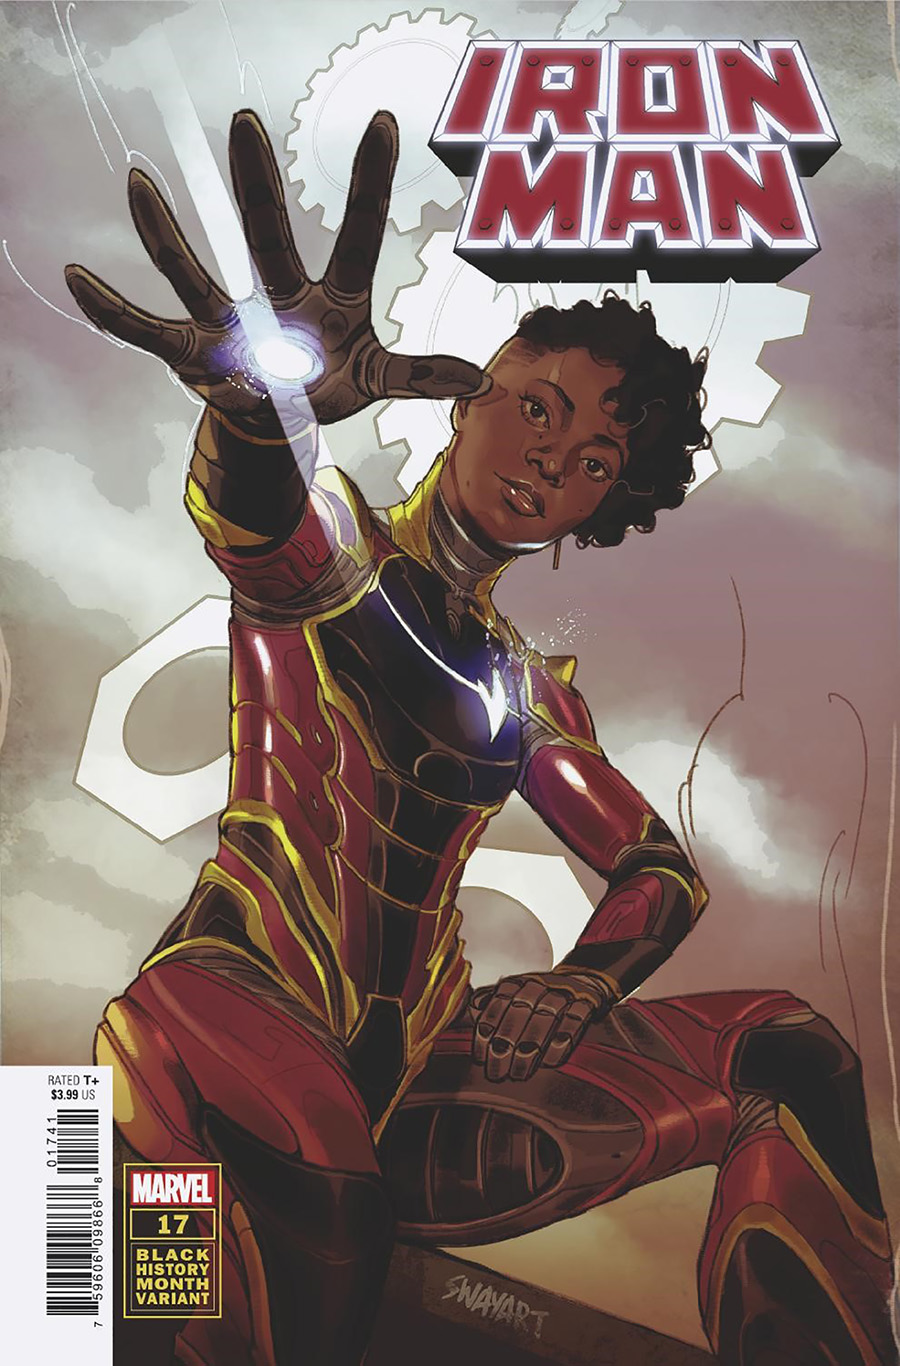 Iron Man Vol 6 #17 Cover B Variant Joshua Sway Swaby Black History Month Cover (Limit 1 Per Customer)